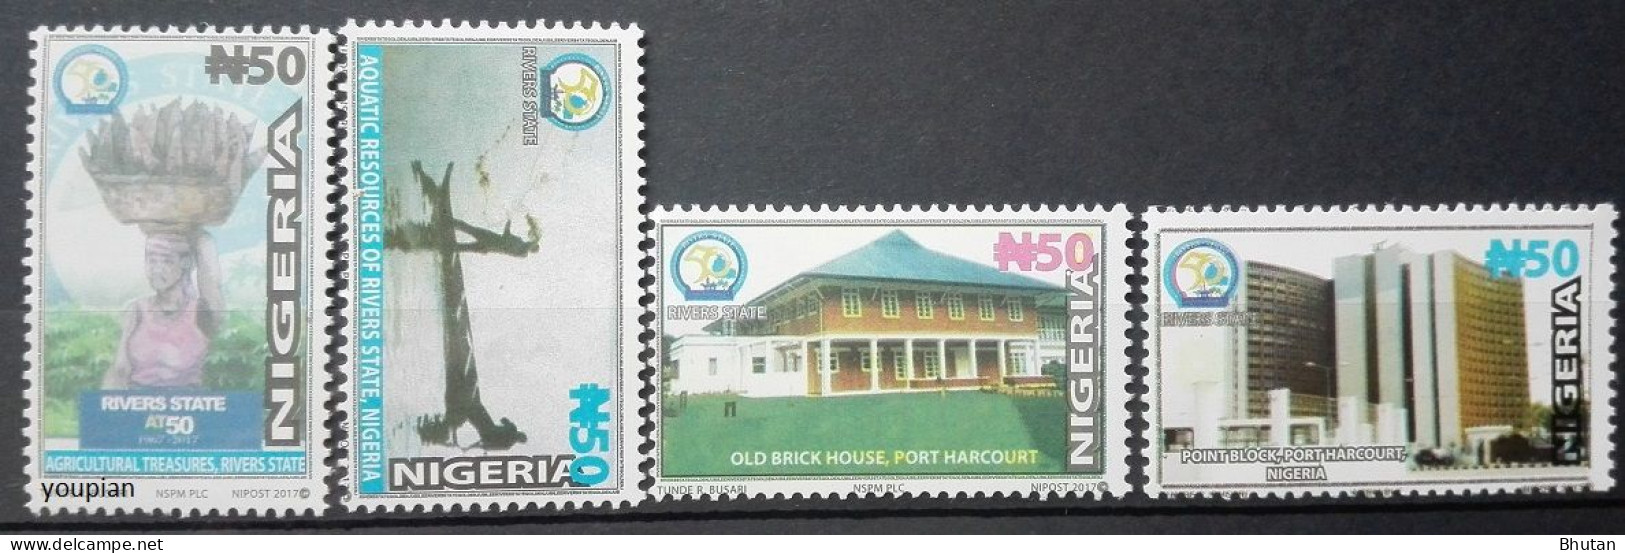 Nigeria 2018, Nigerian Dailylife And Buildings - River State, MNH Stamps Set - Nigeria (1961-...)